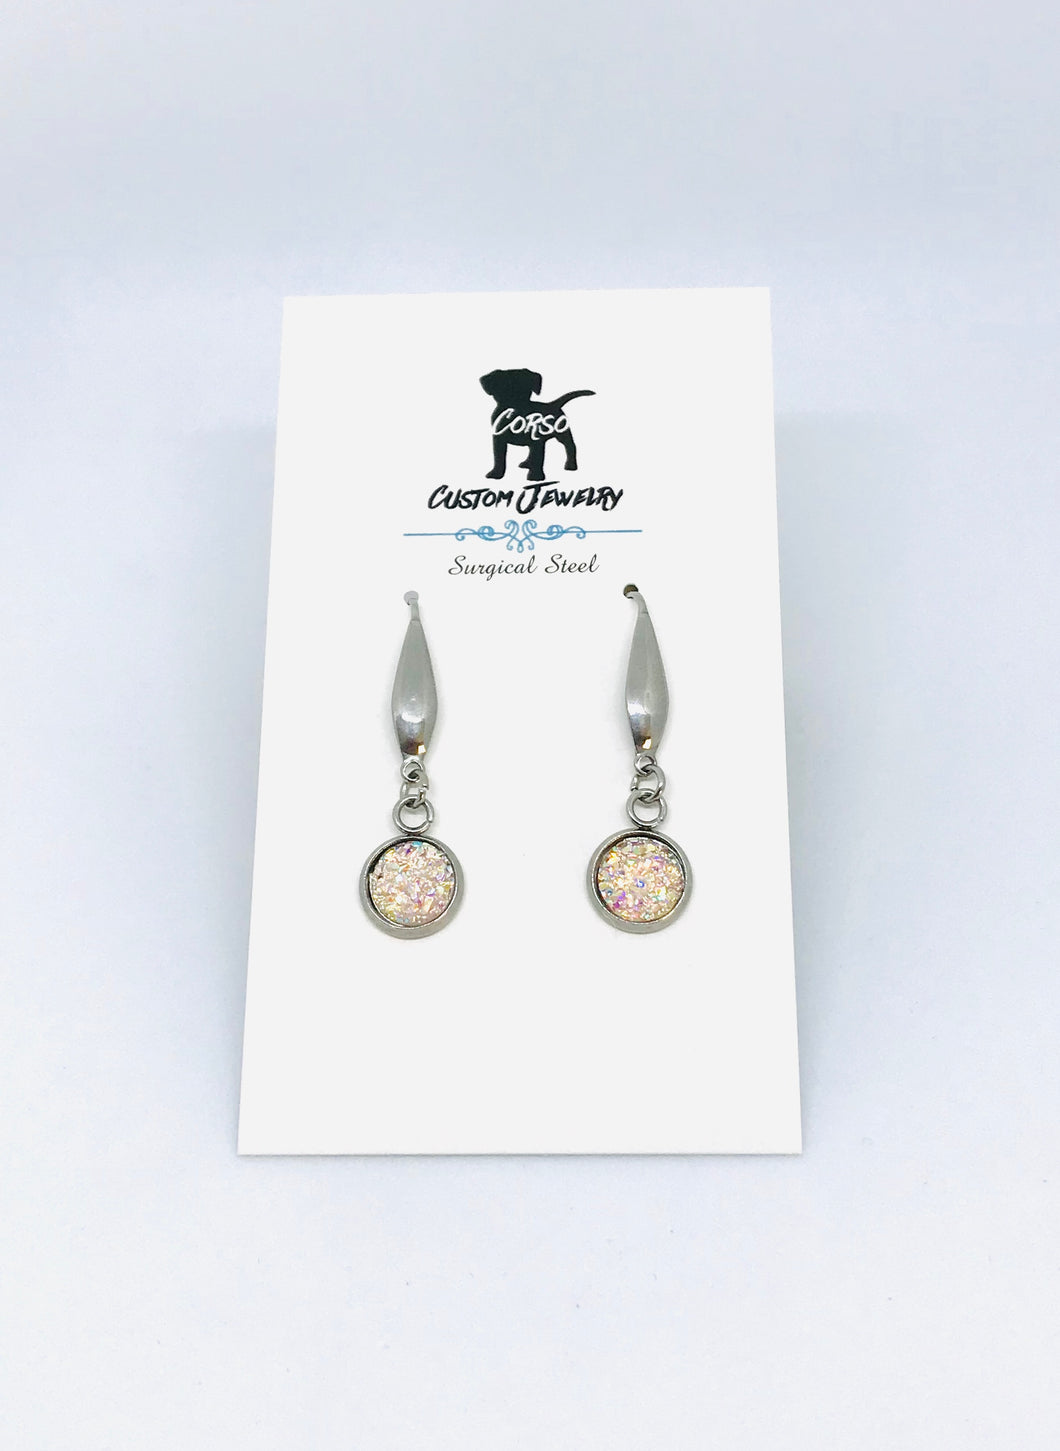 8mm Cotton Candy Pink Druzy Drop Earrings (Surgical Steel)